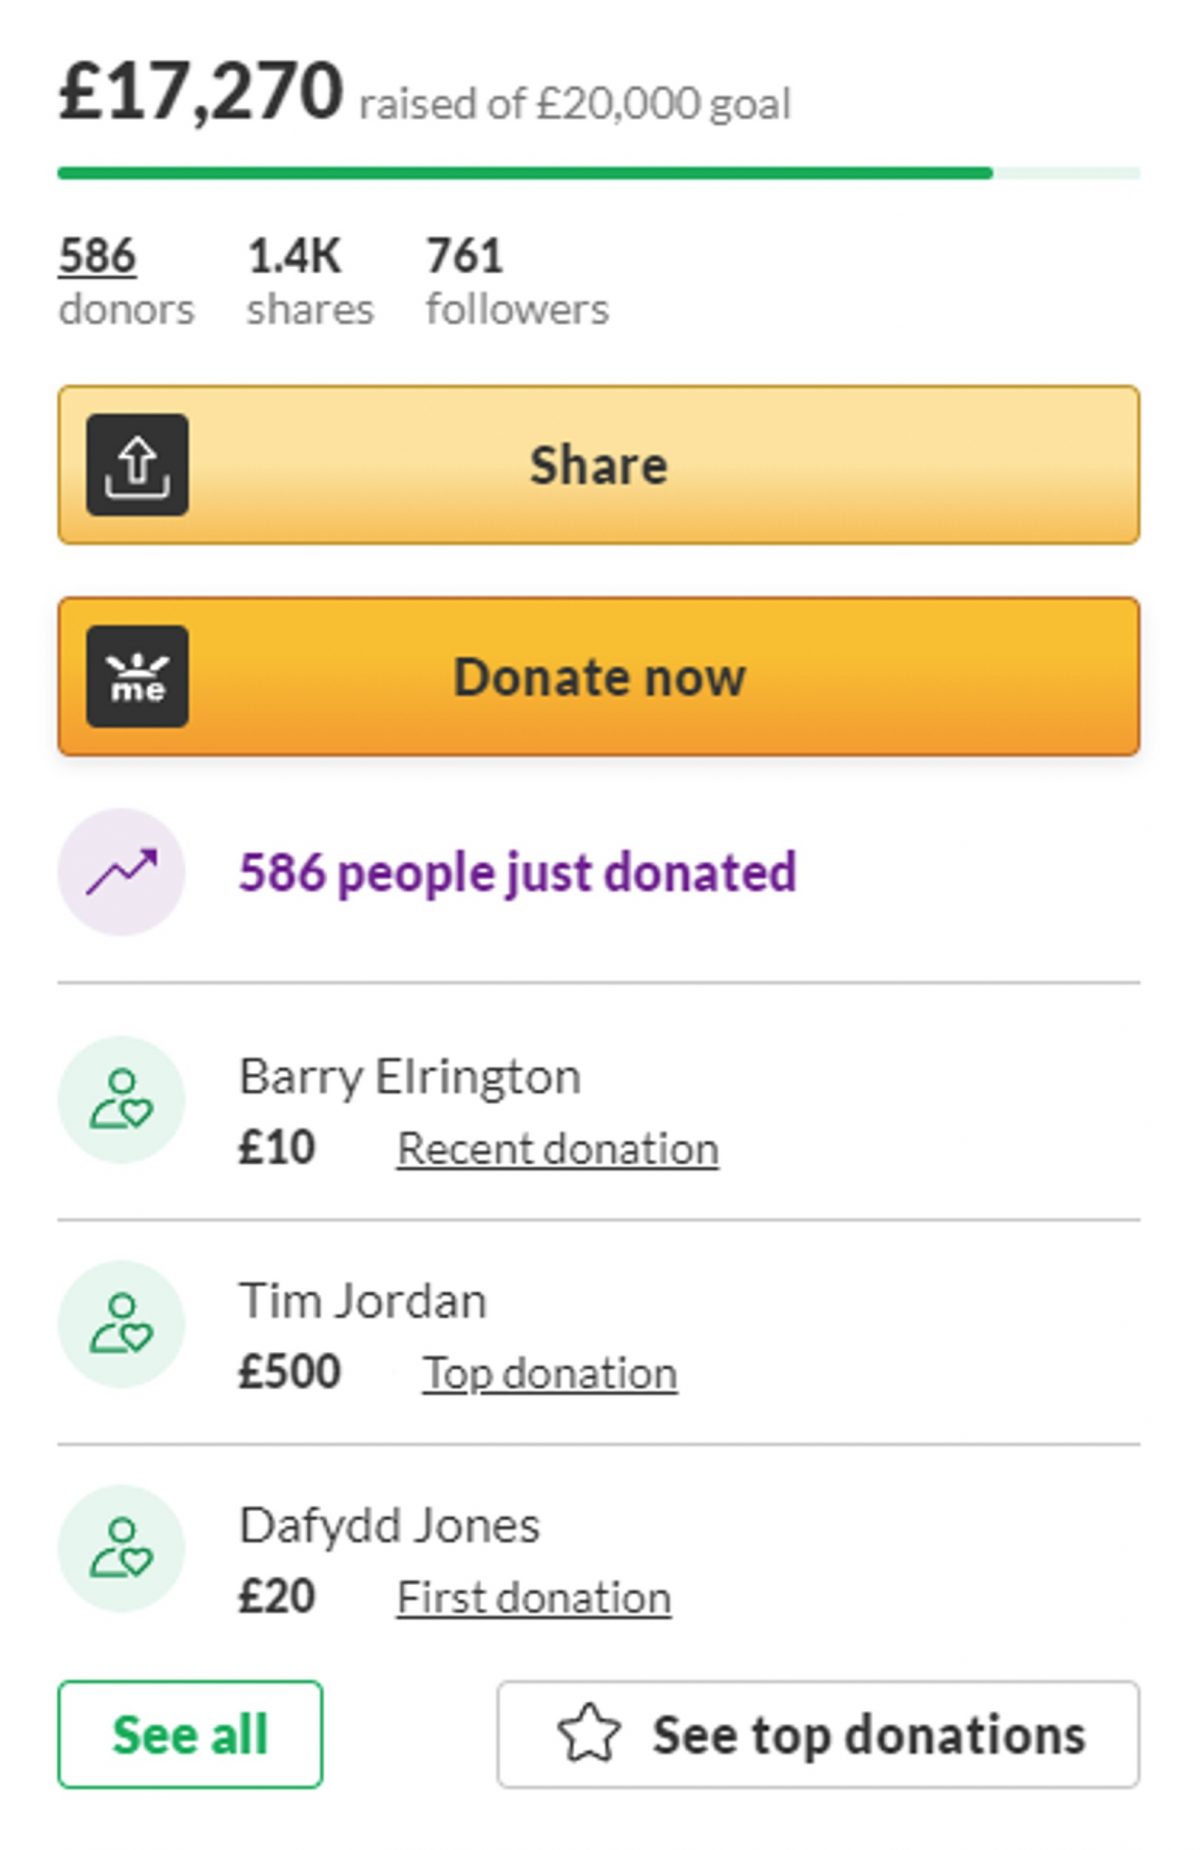 A screenshot of the GoFundMe detailing how it has raised over £17,000 in 48 hours for Ashley Mooney, who suffered a horrific rugby injury.